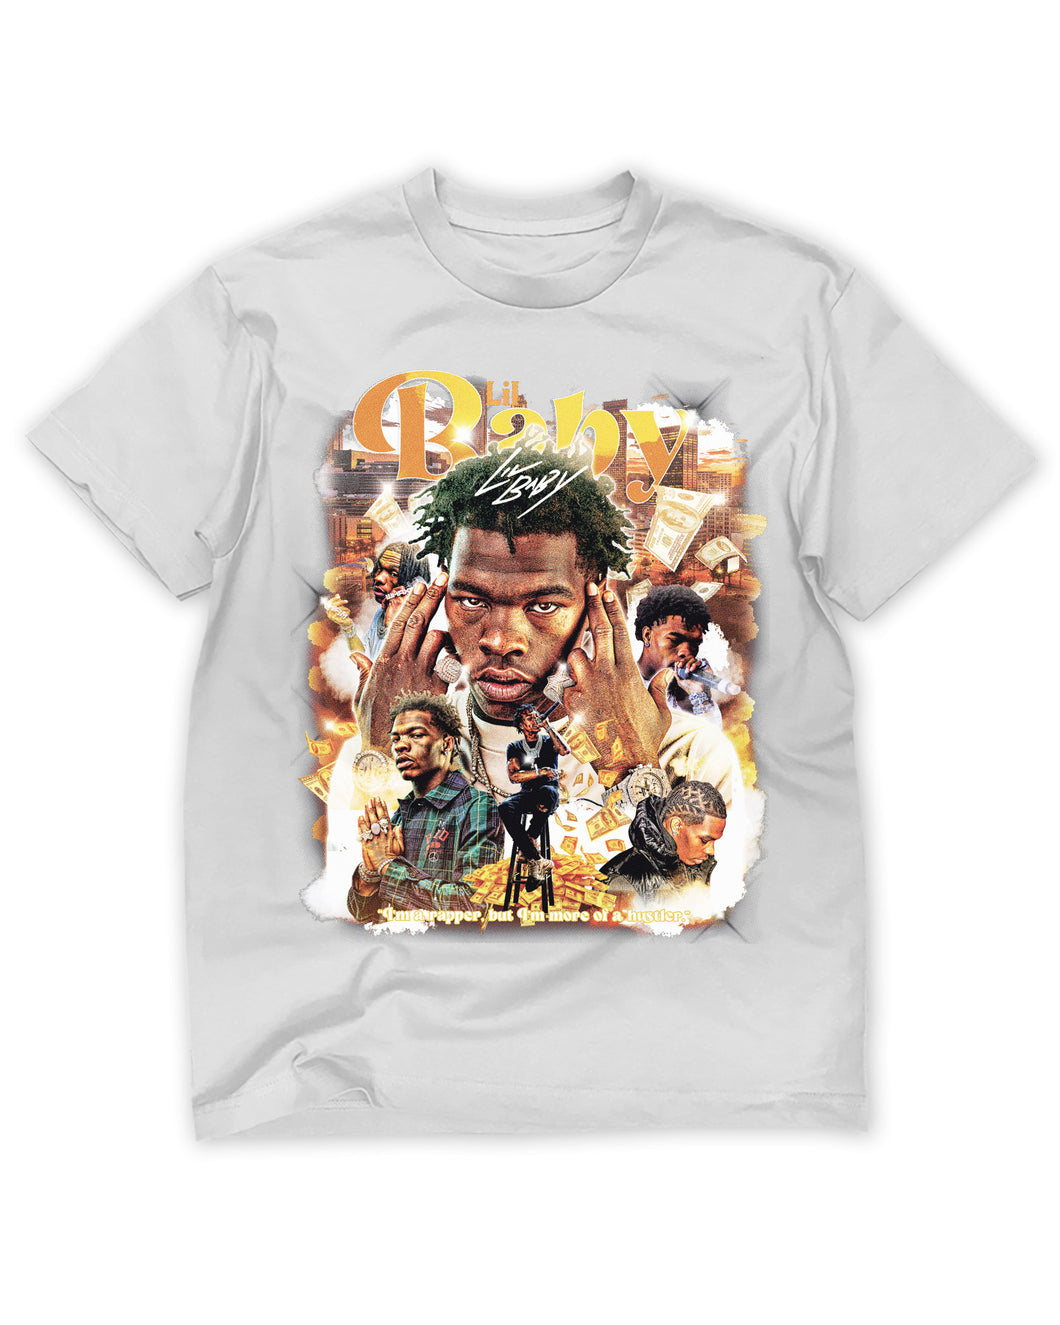 Lil Baby Tee - White